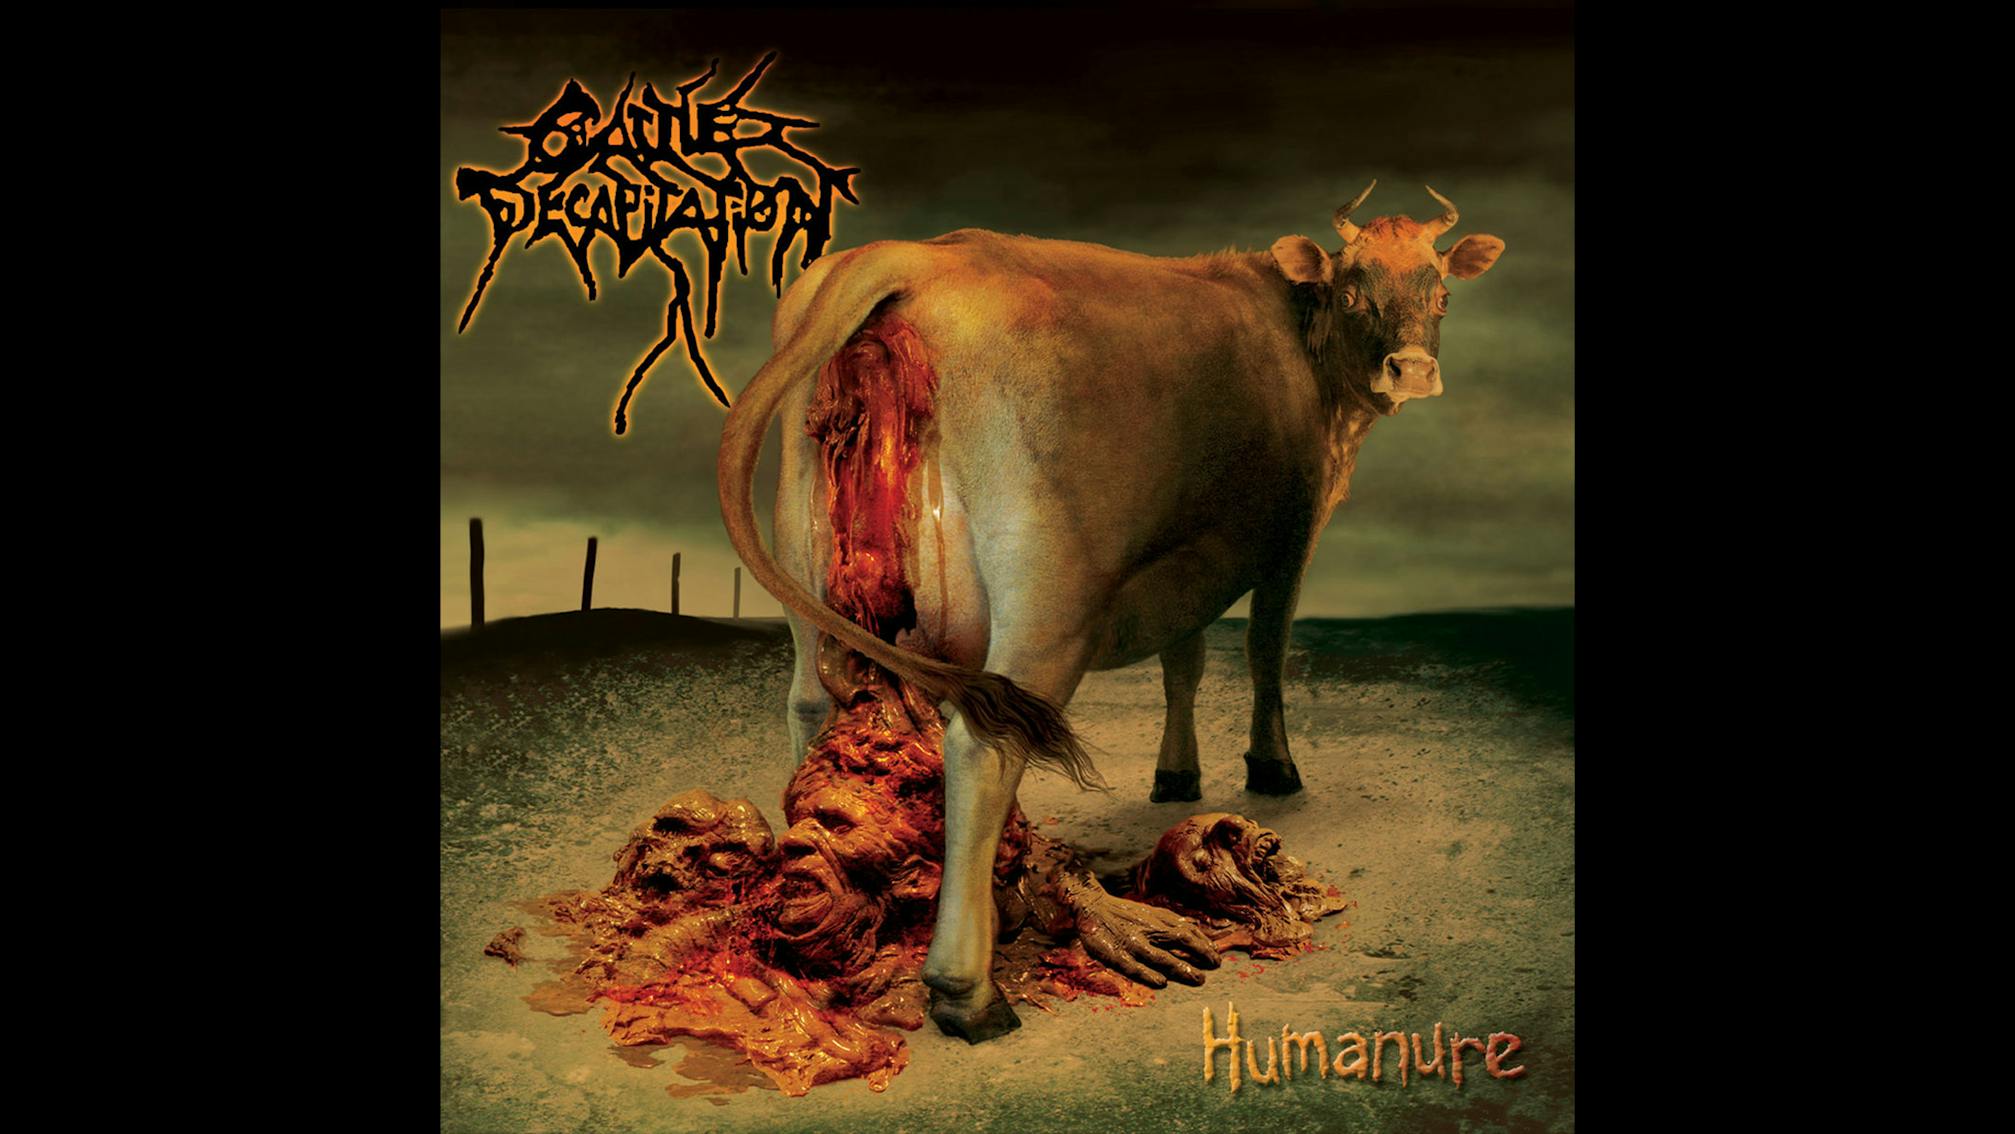 We Spoke To The Guy Behind The Most Controversial Album Cover In Metal